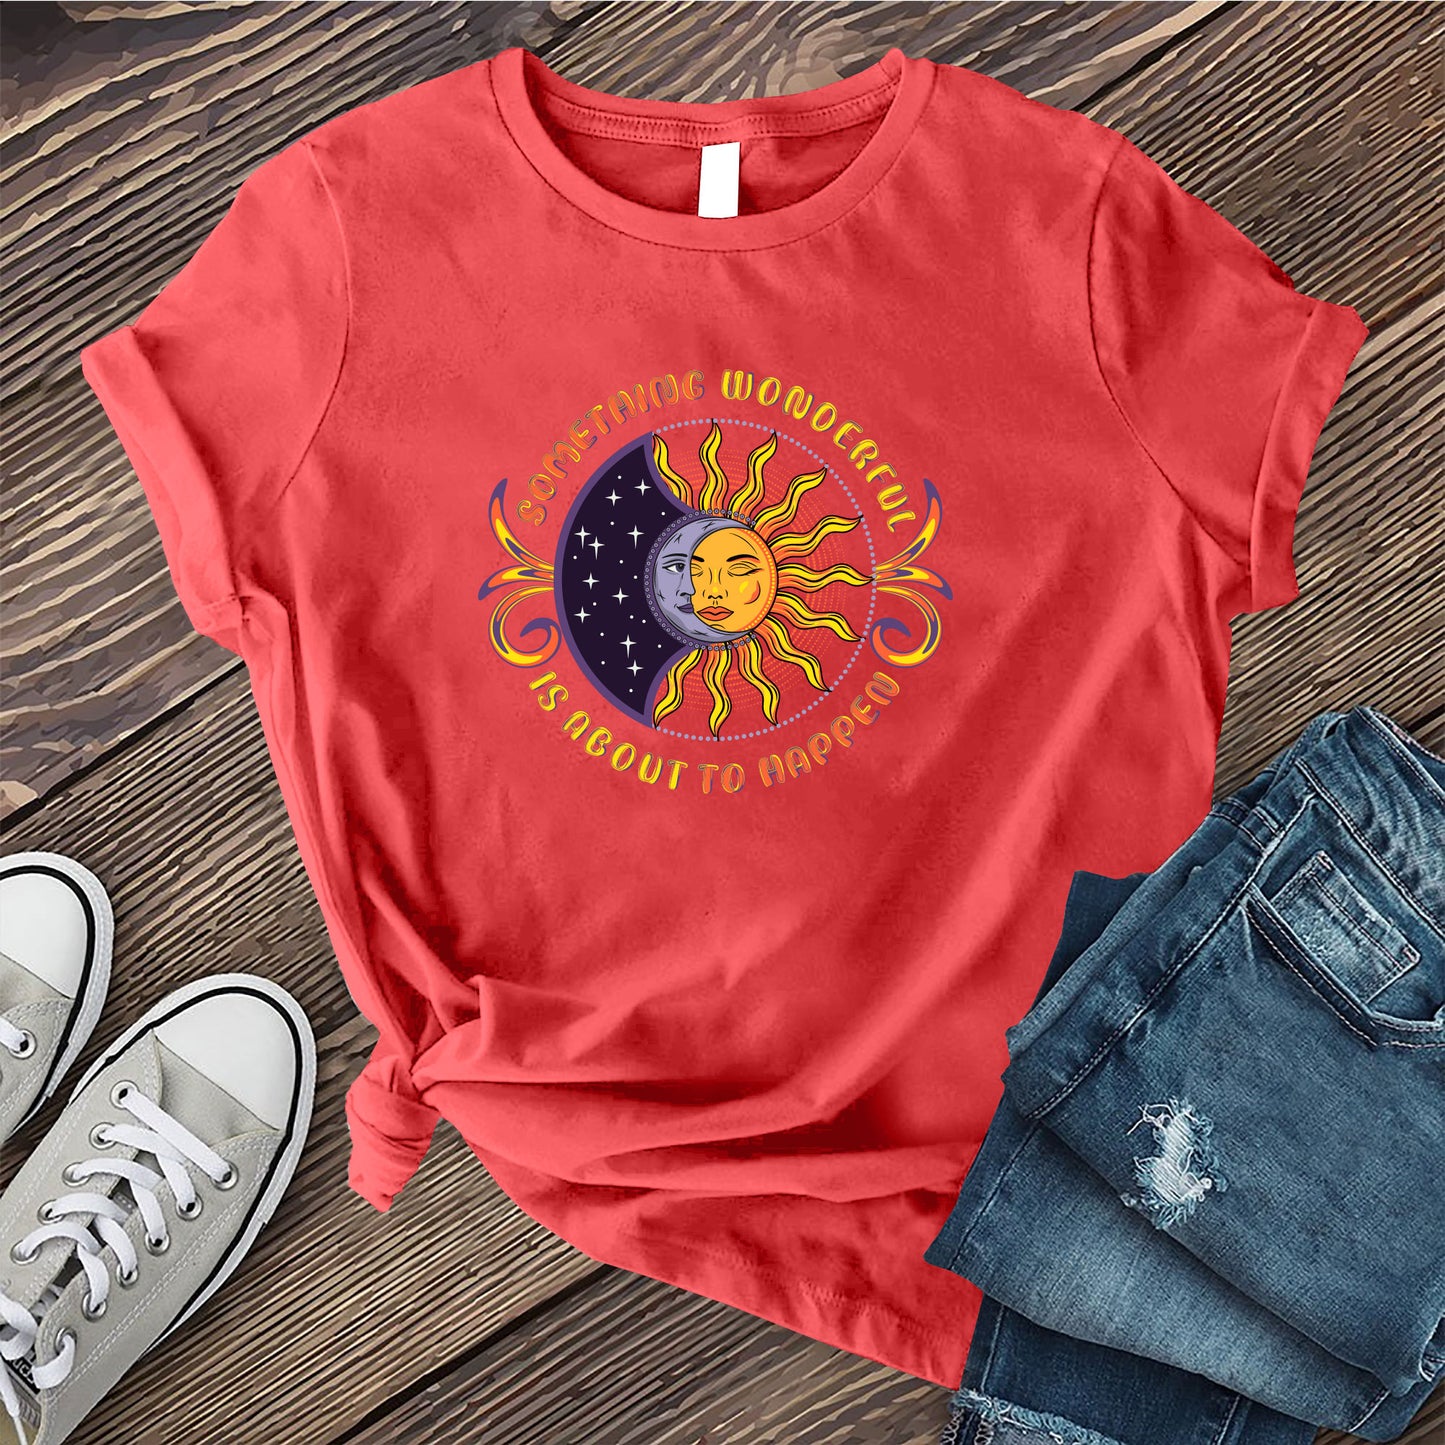 Something Wonderful Is About To Happen T-shirt